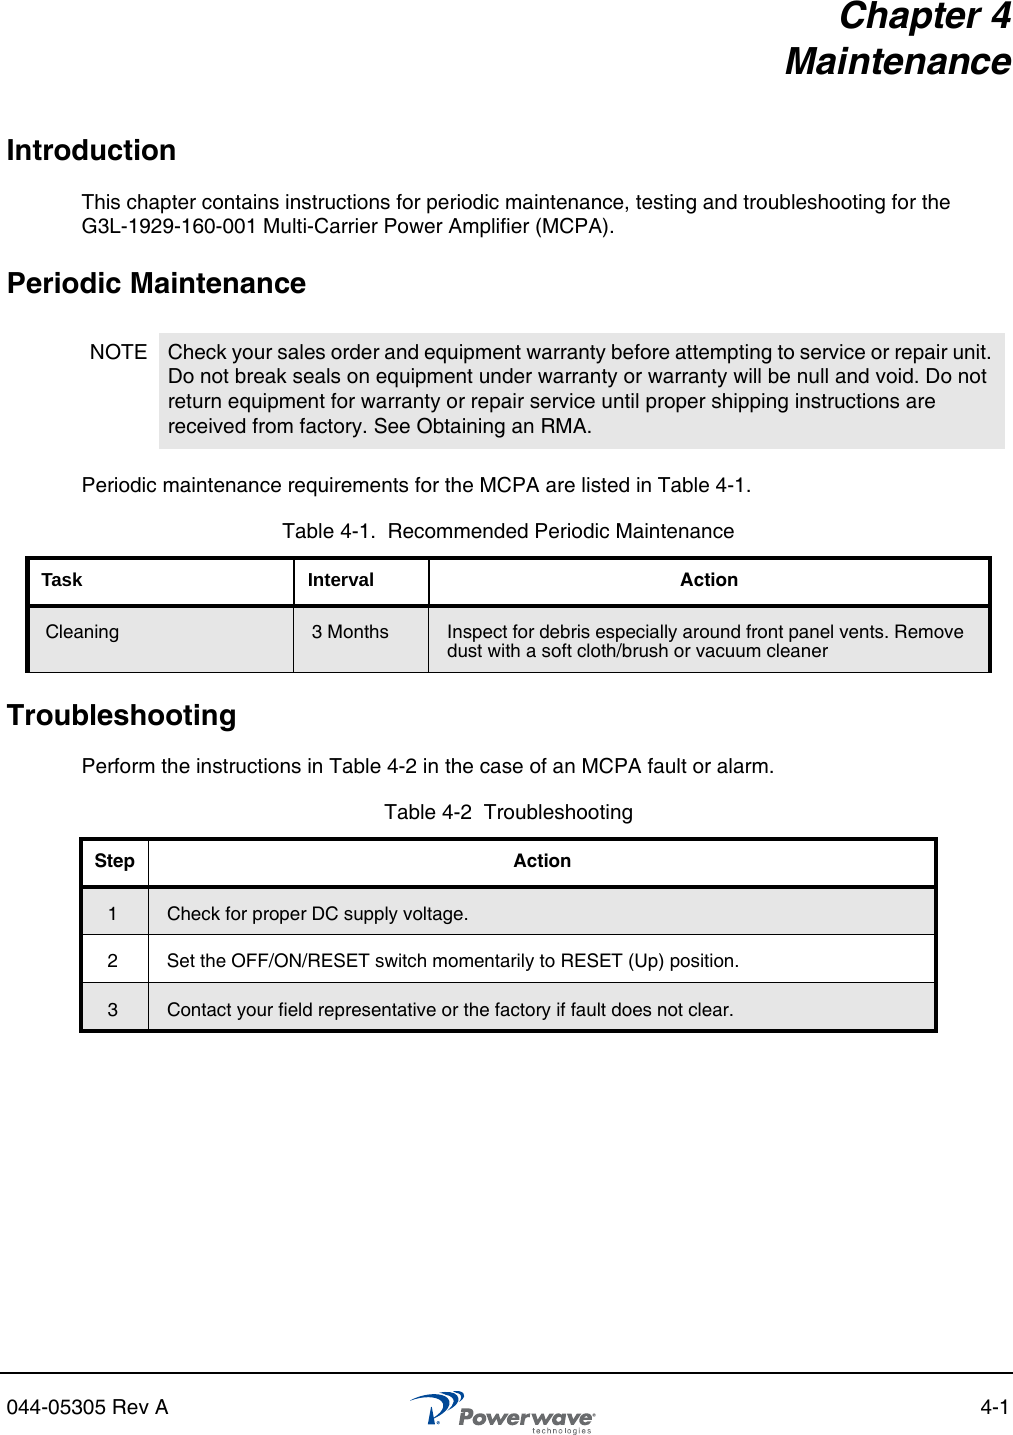 044-05305 Rev A 4-1Chapter 4MaintenanceIntroductionThis chapter contains instructions for periodic maintenance, testing and troubleshooting for the G3L-1929-160-001 Multi-Carrier Power Amplifier (MCPA).Periodic MaintenancePeriodic maintenance requirements for the MCPA are listed in Table 4-1.TroubleshootingPerform the instructions in Table 4-2 in the case of an MCPA fault or alarm.NOTE Check your sales order and equipment warranty before attempting to service or repair unit. Do not break seals on equipment under warranty or warranty will be null and void. Do not return equipment for warranty or repair service until proper shipping instructions are received from factory. See Obtaining an RMA.Table 4-1.  Recommended Periodic MaintenanceTask Interval ActionCleaning  3 Months Inspect for debris especially around front panel vents. Remove dust with a soft cloth/brush or vacuum cleanerTable 4-2  TroubleshootingStep Action1Check for proper DC supply voltage.2 Set the OFF/ON/RESET switch momentarily to RESET (Up) position.3Contact your field representative or the factory if fault does not clear.